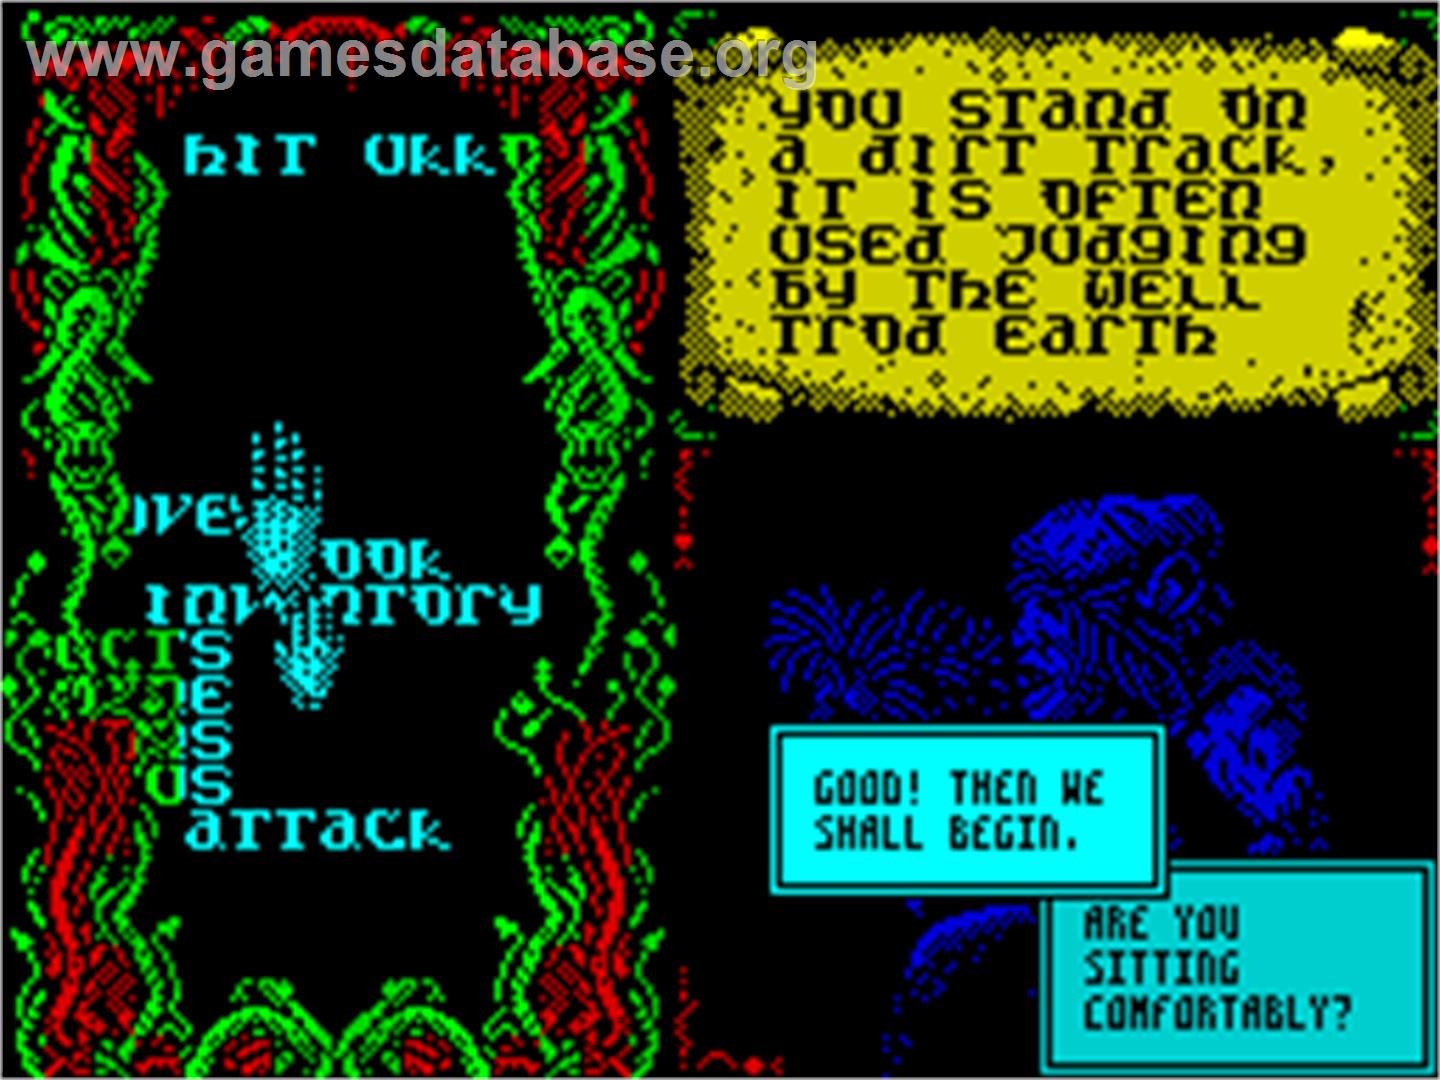 Sláine, the Celtic Barbarian - Sinclair ZX Spectrum - Artwork - In Game